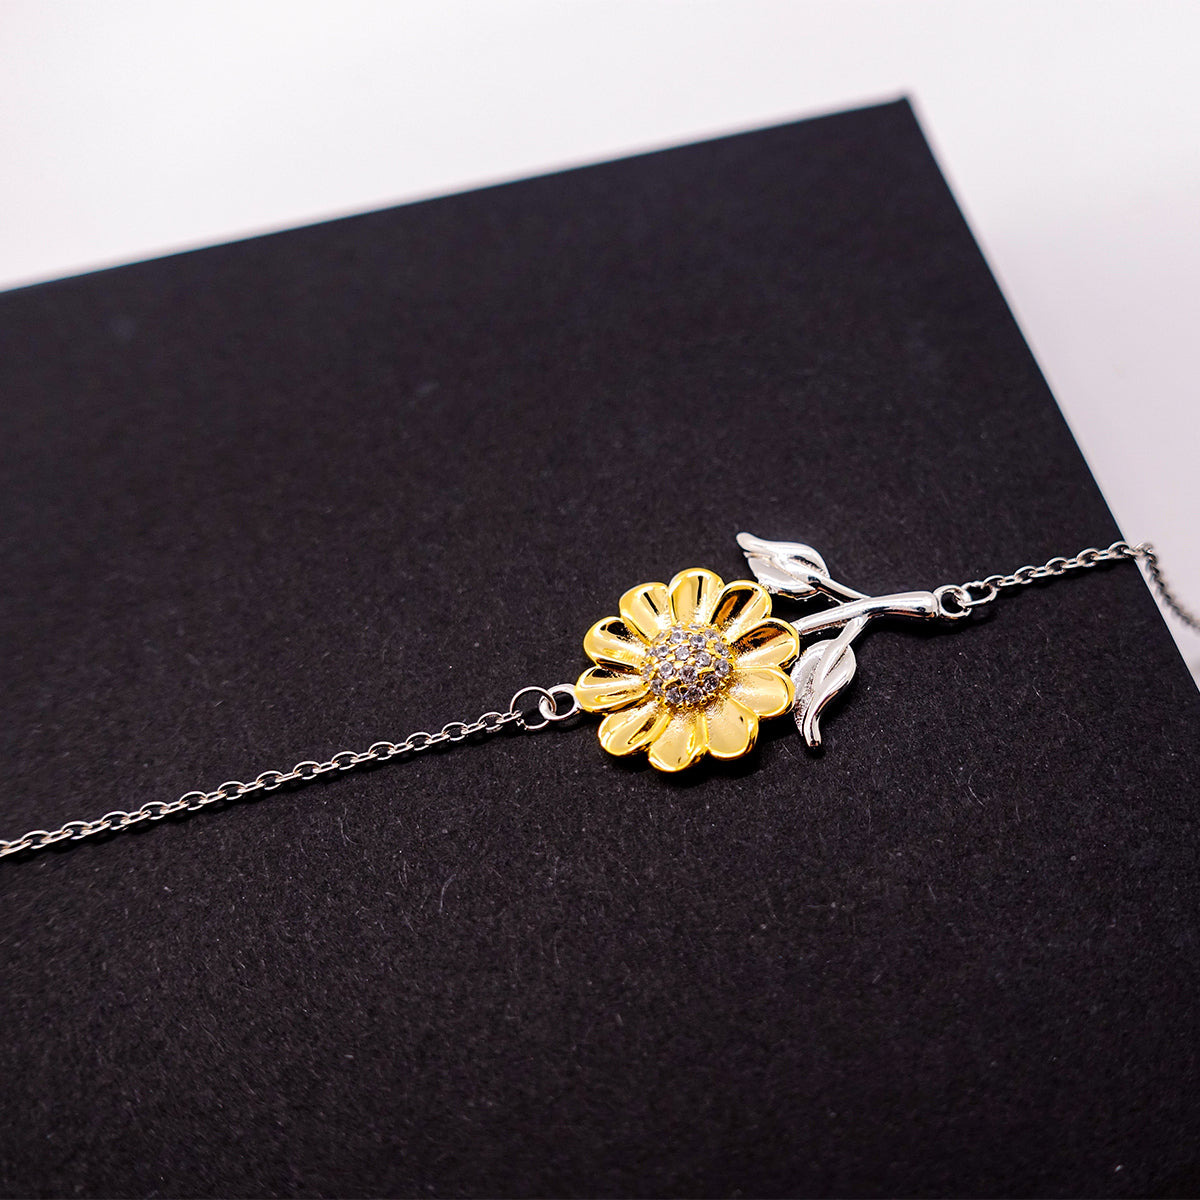 Sunflower Bracelet for Wife - Engraved Love and Confidence, Perfect Gift for Christmas, Birthday, Easter - 1 John 4:18 Inspirational Jewelry for Wife